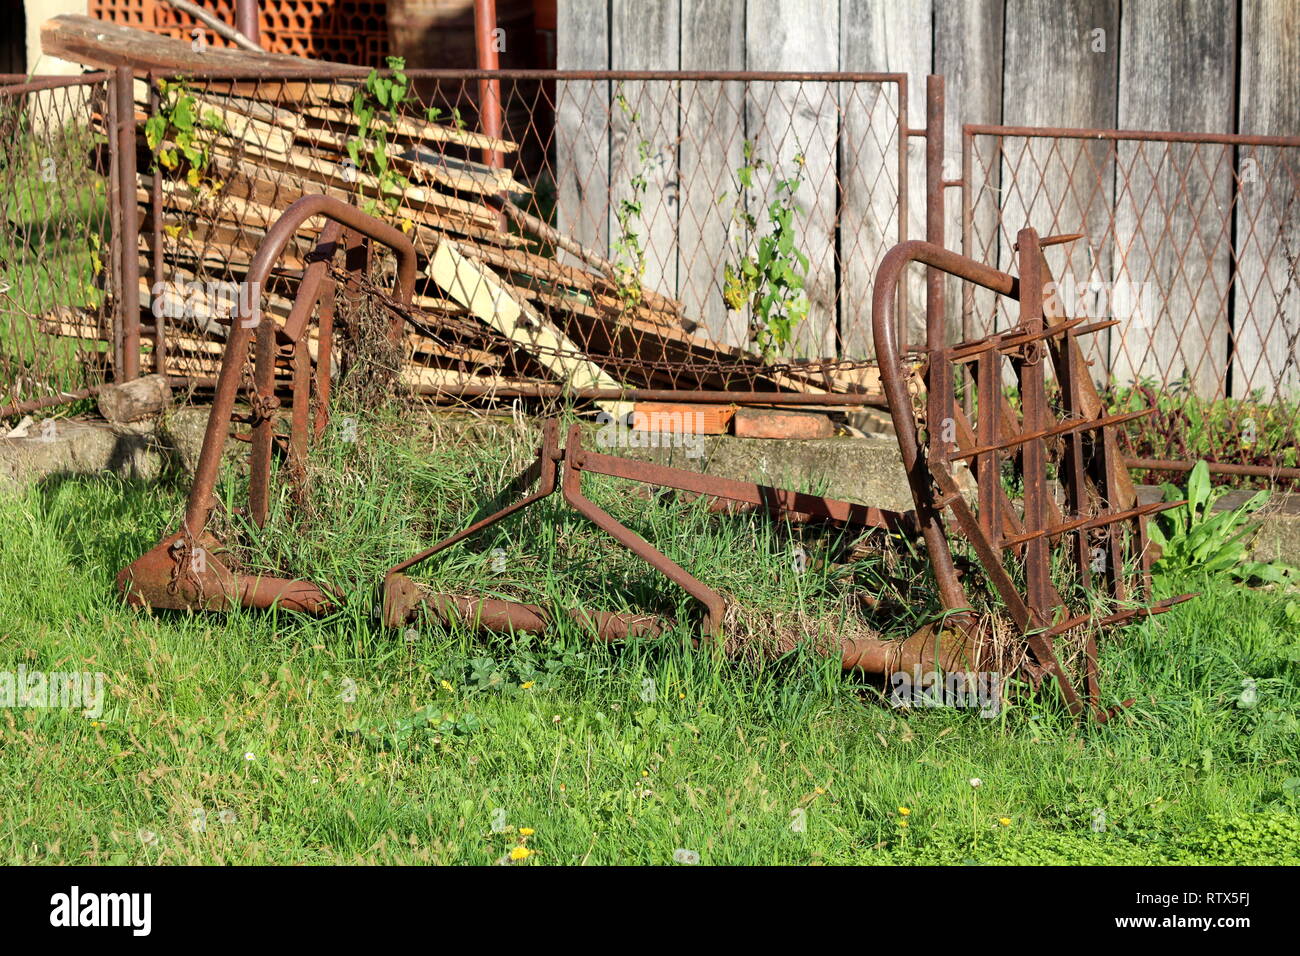 Rusted Abandoned Vintage Agricultural Farming Equipment Used To Work